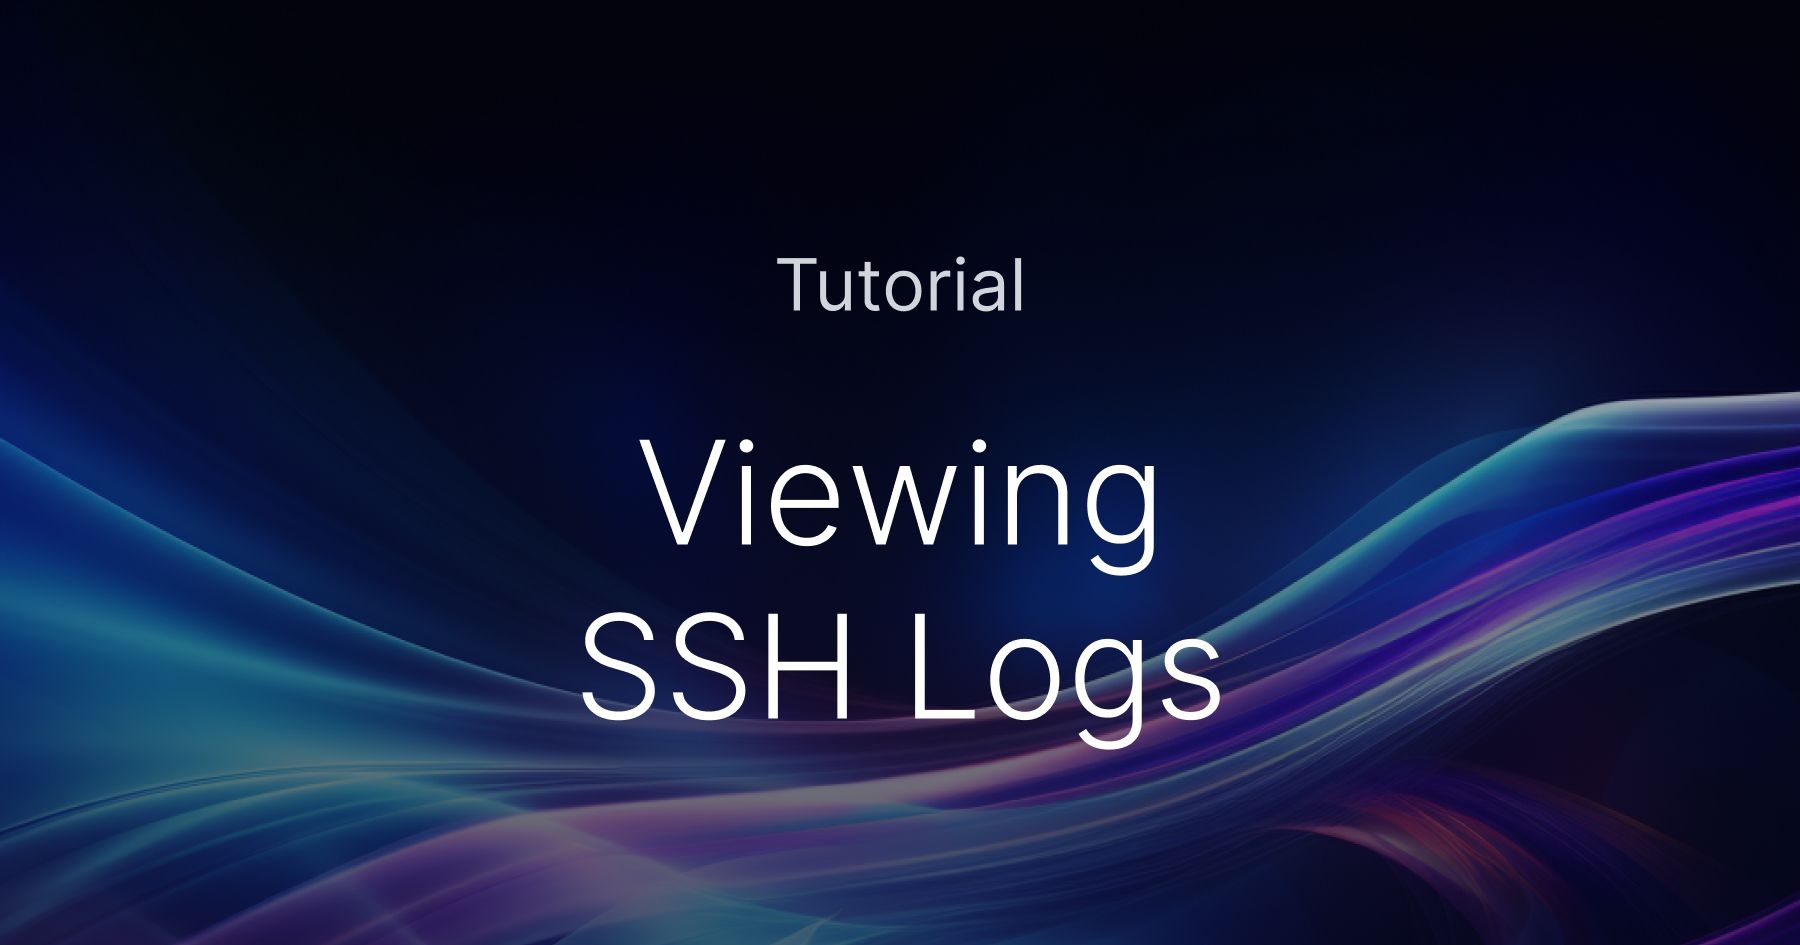 How to view SSH logs?